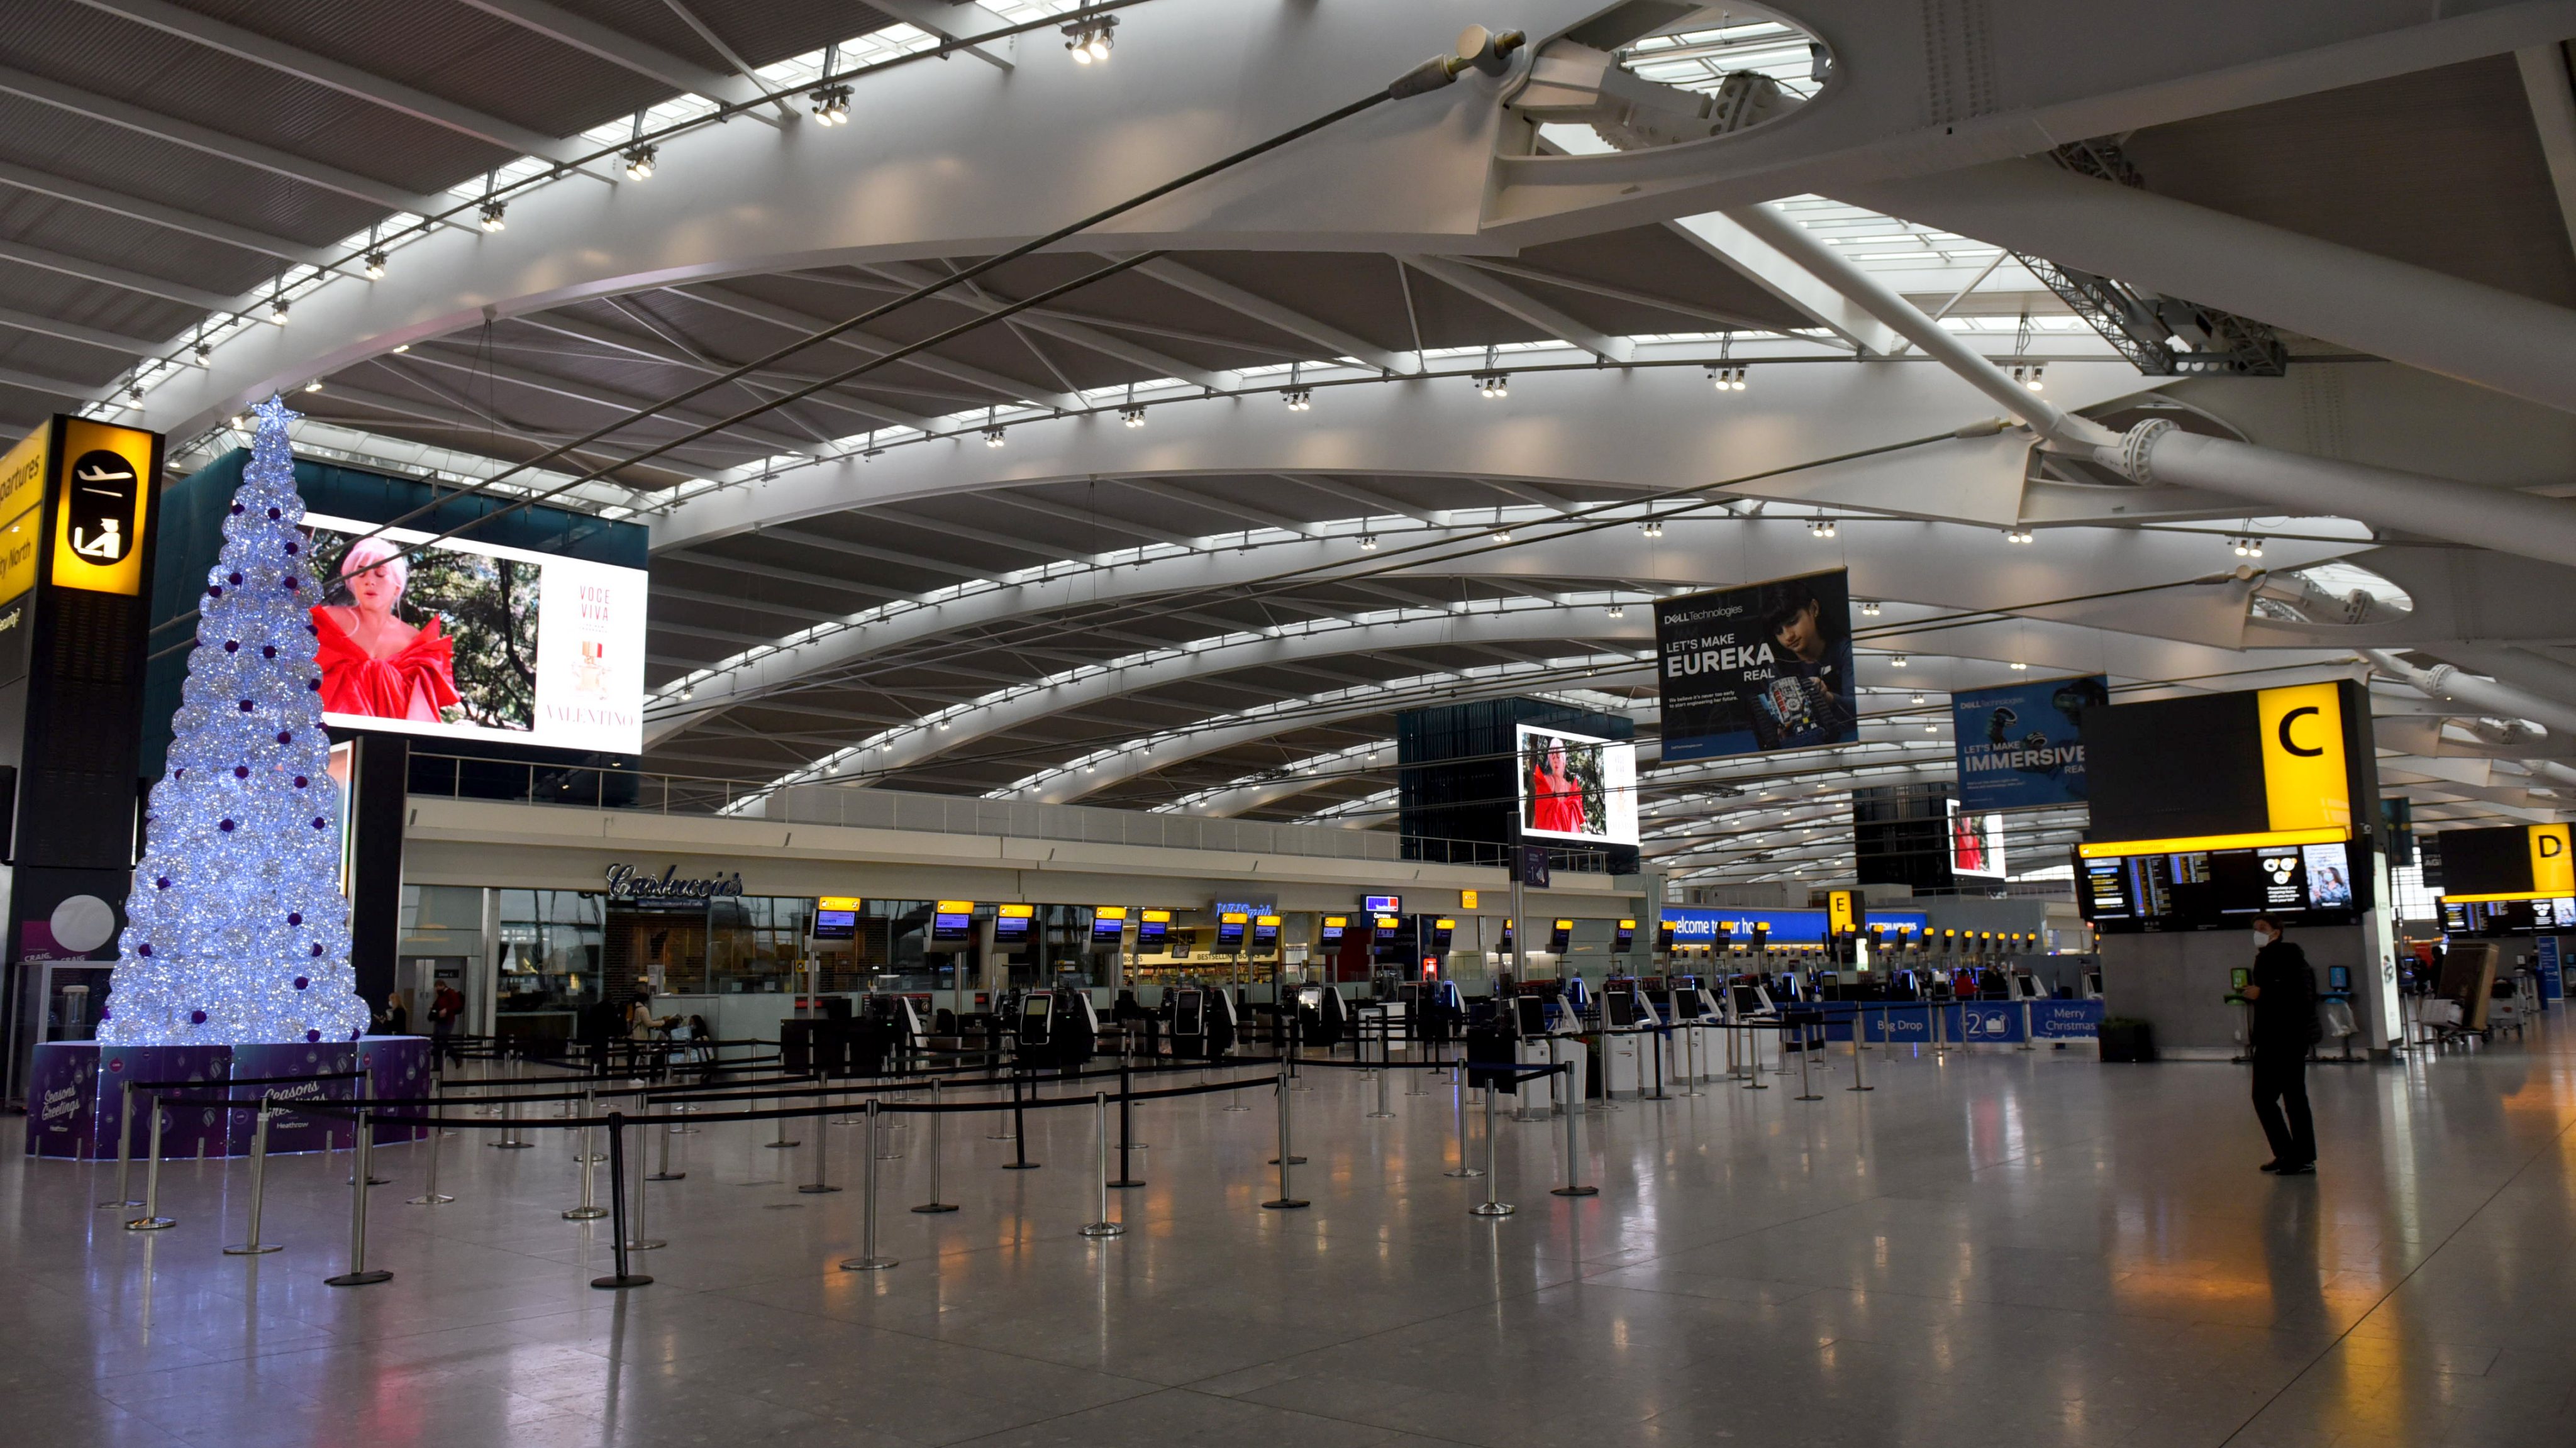 Londoners wait at Heathrow to flee capital as nations bar travelers from UK over new variant of coronavirus